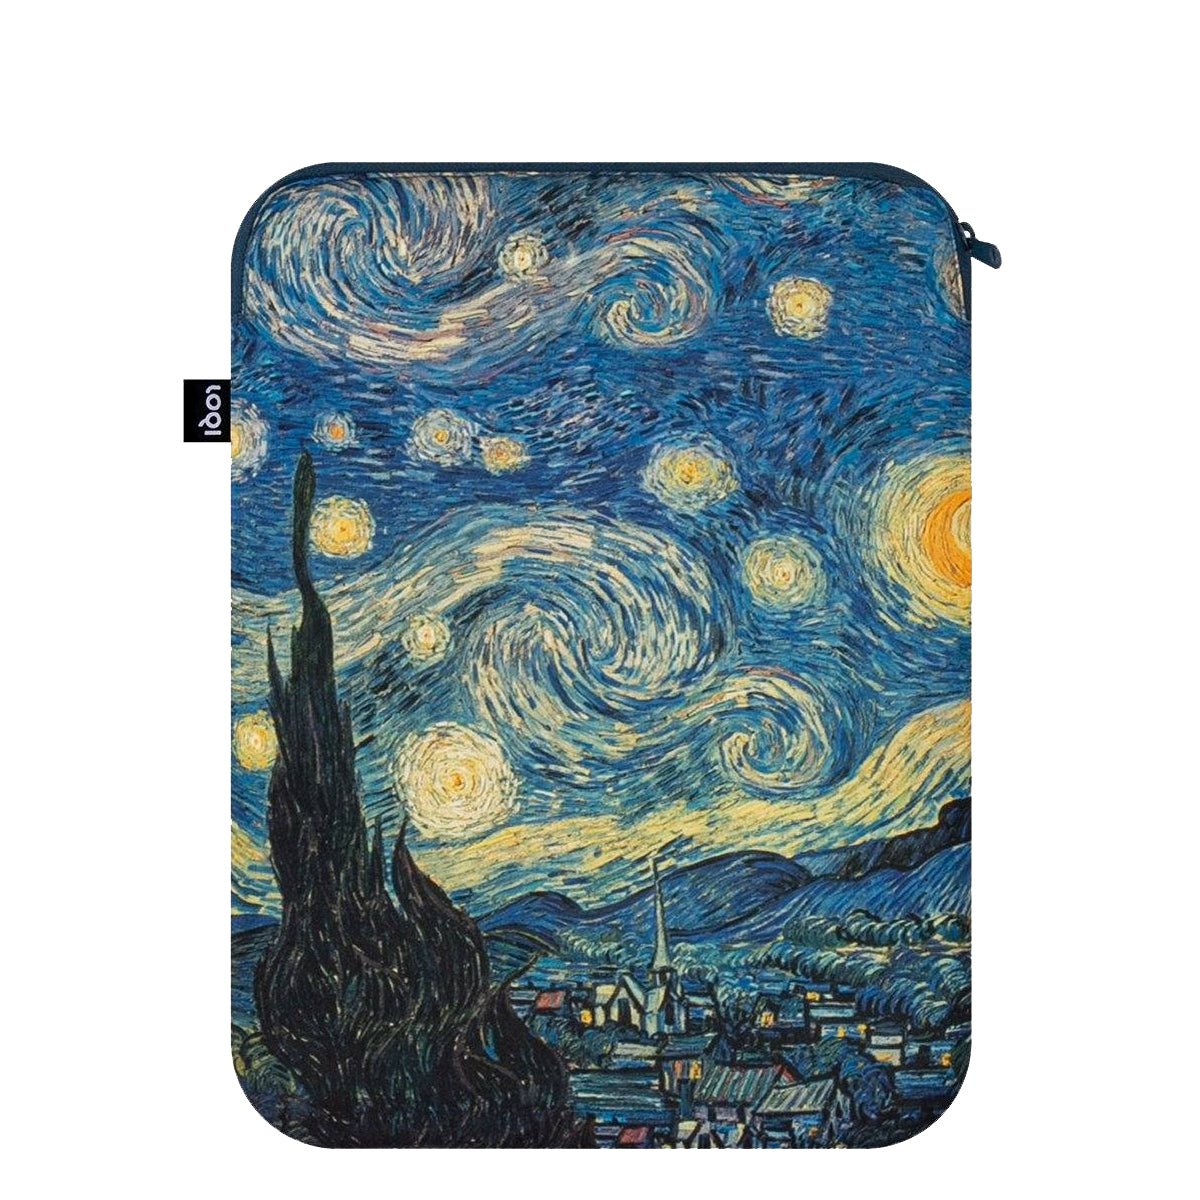 LOQI Museum Vincent van Gogh's The Starry Night Laptop Cover